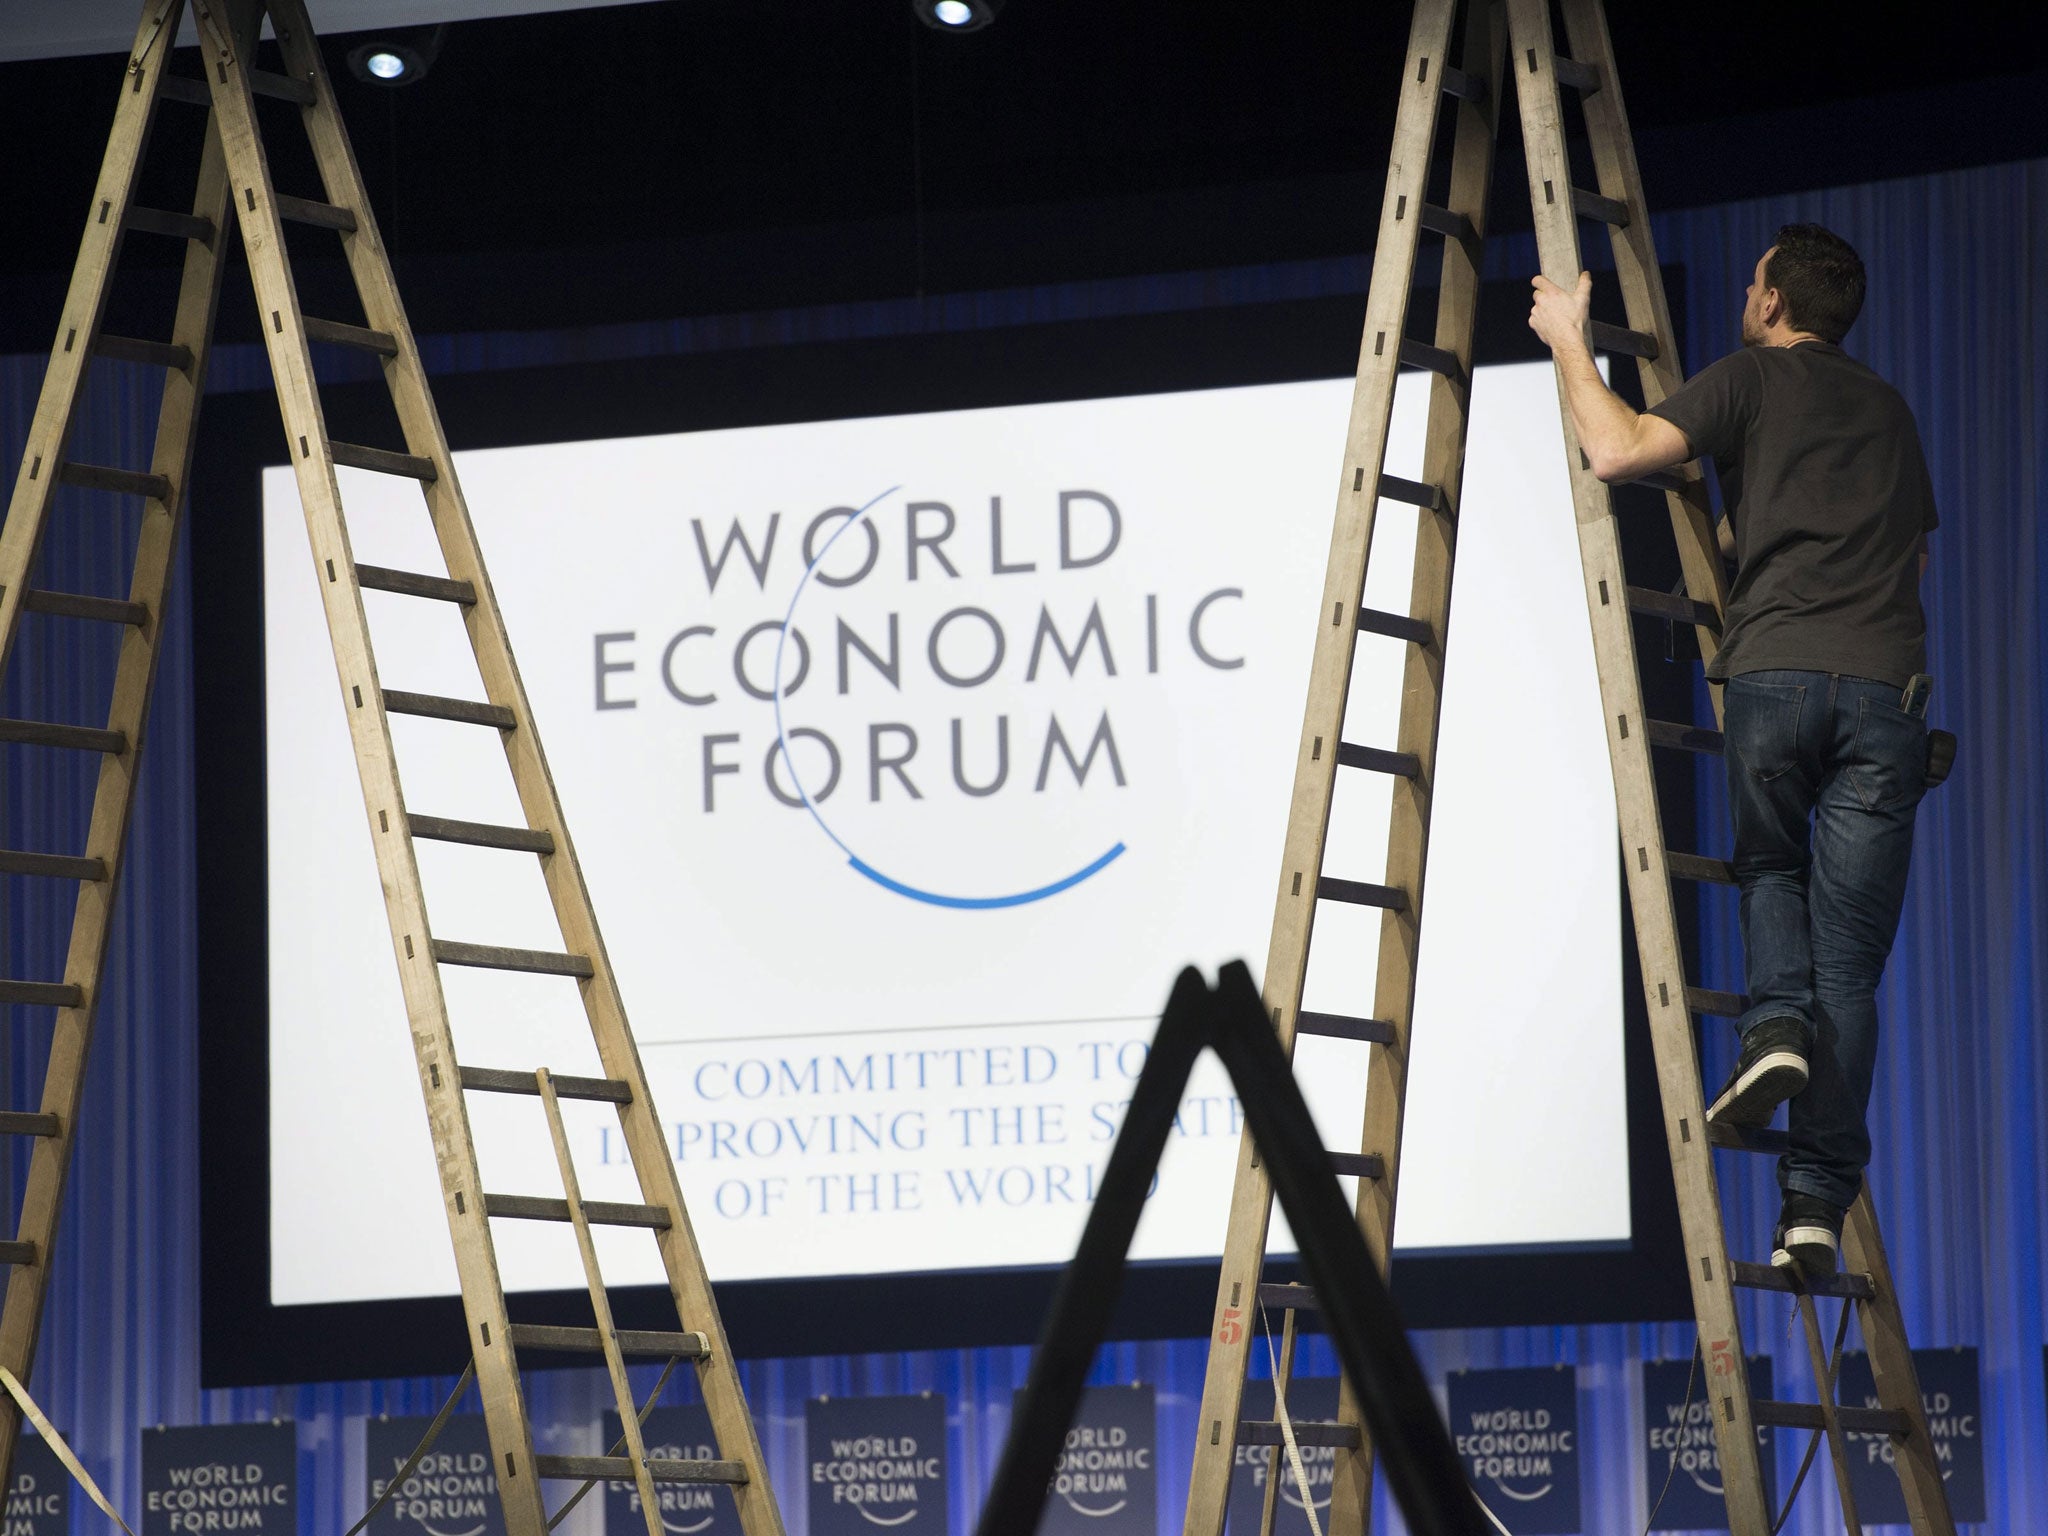 The question for Davos is what next?